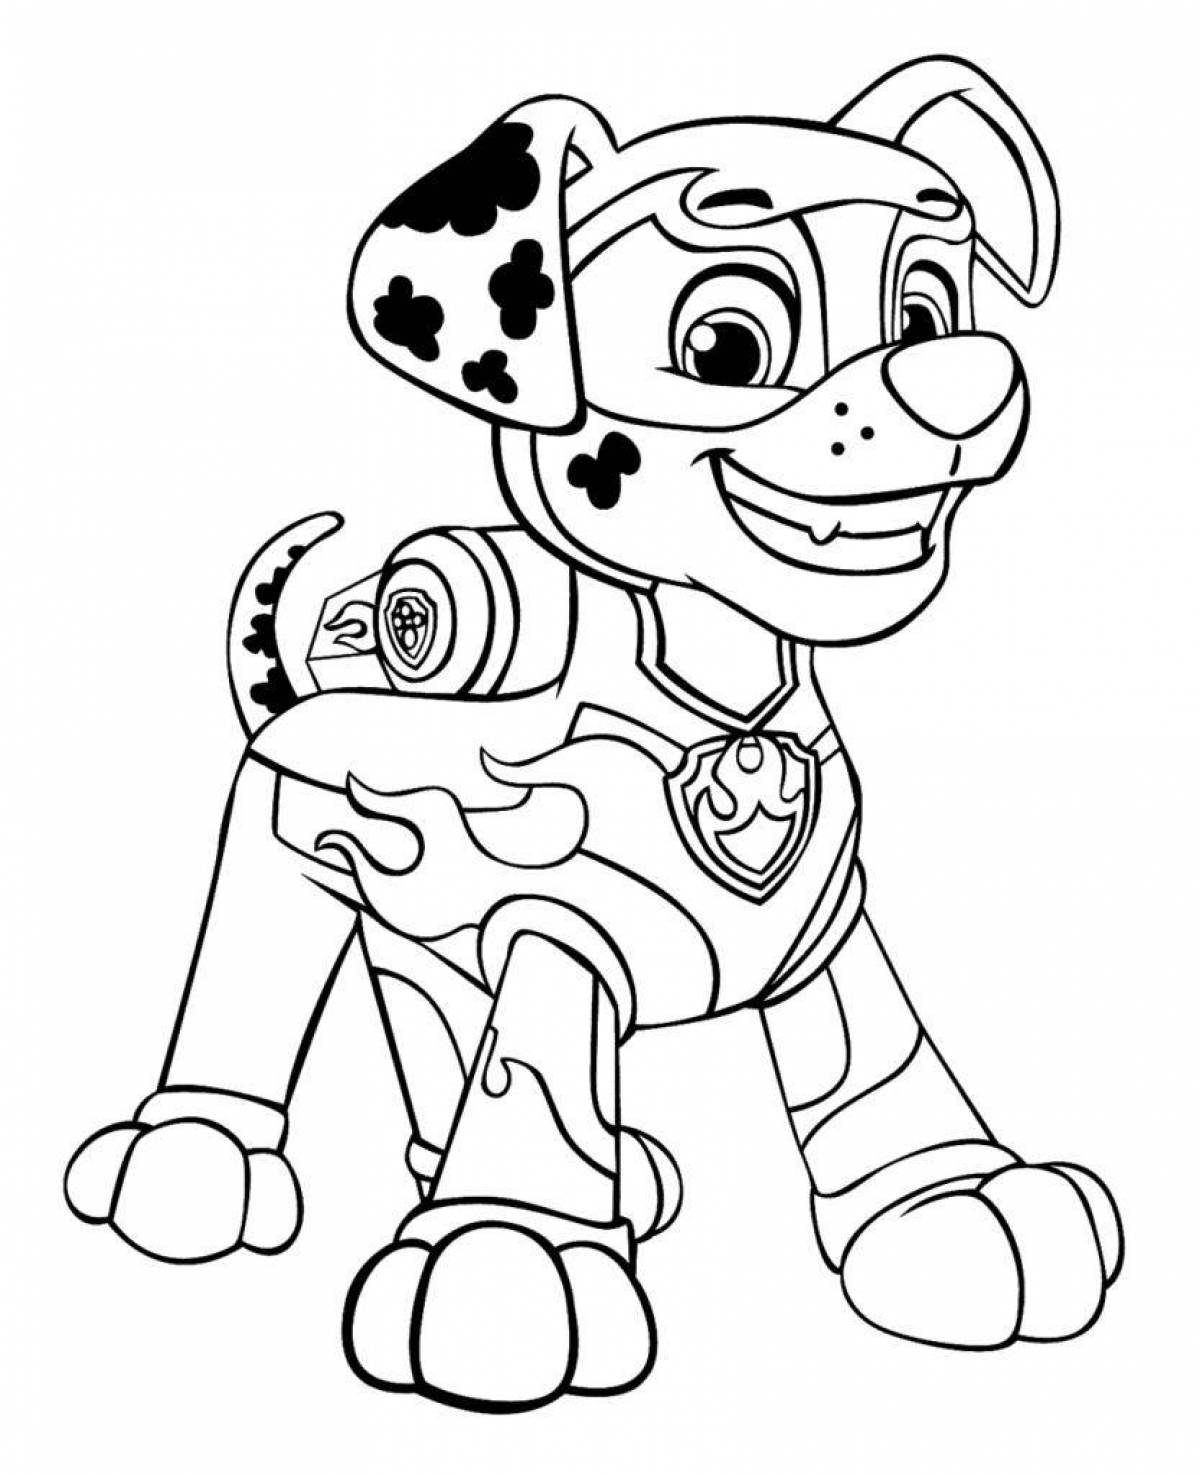 Amazing robot dog coloring page